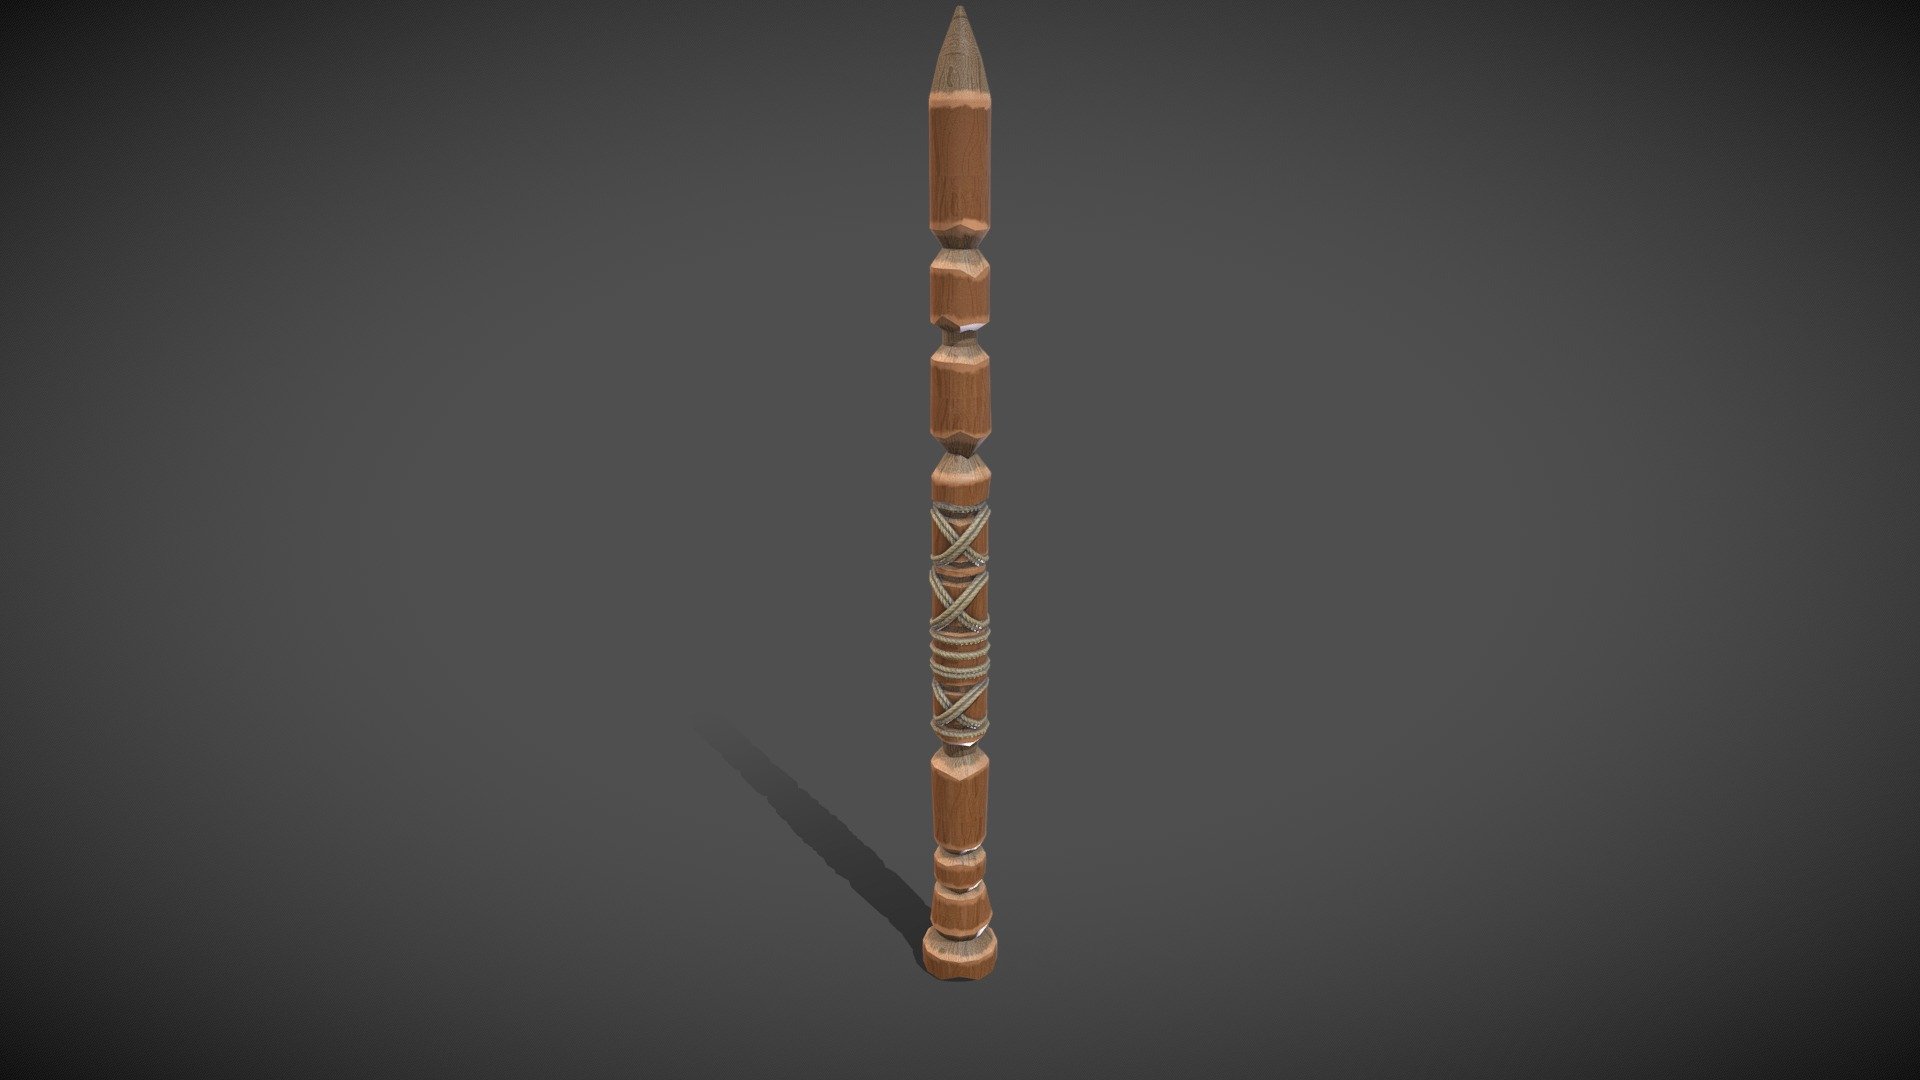 Wooden_Stake
Modeled with Maya
Substance painter for texturing - Wooden_Stake - 3D model by ShaheenCG 3d model